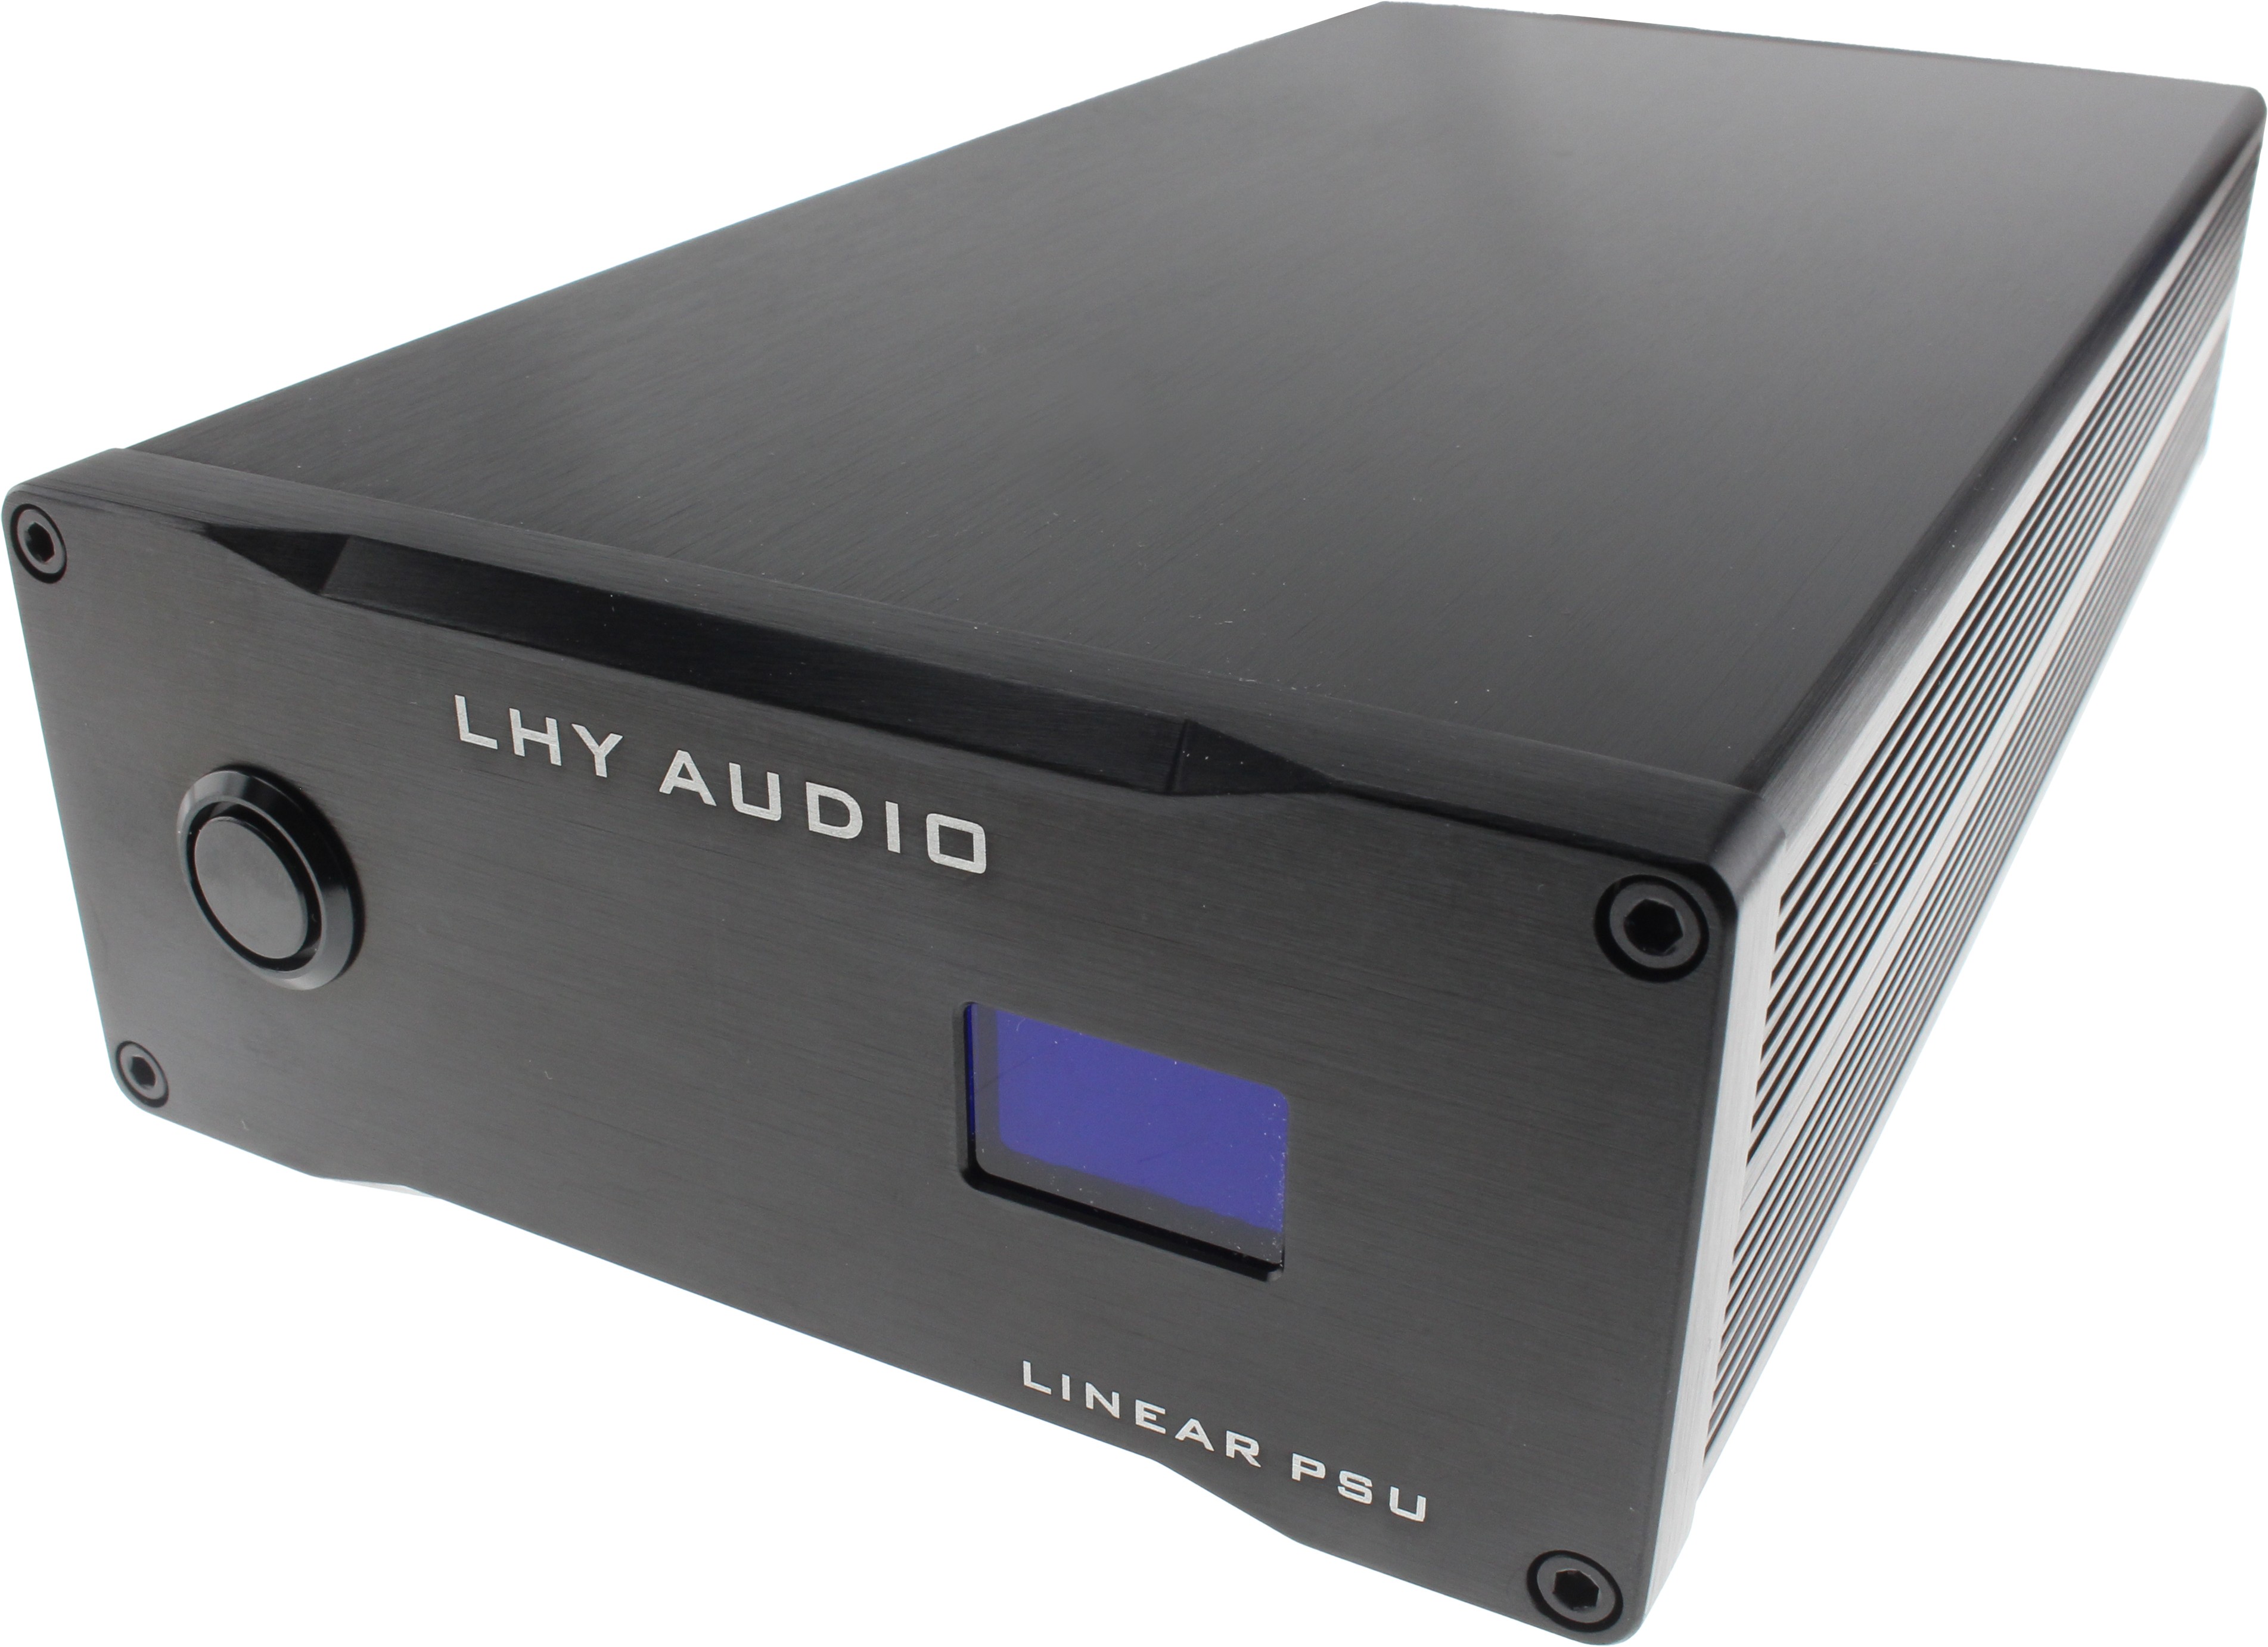 LHY AUDIO LPS80VA PREMIUM Linear Regulated Low Noise Power Supply 230V to 9V 6A 80VA